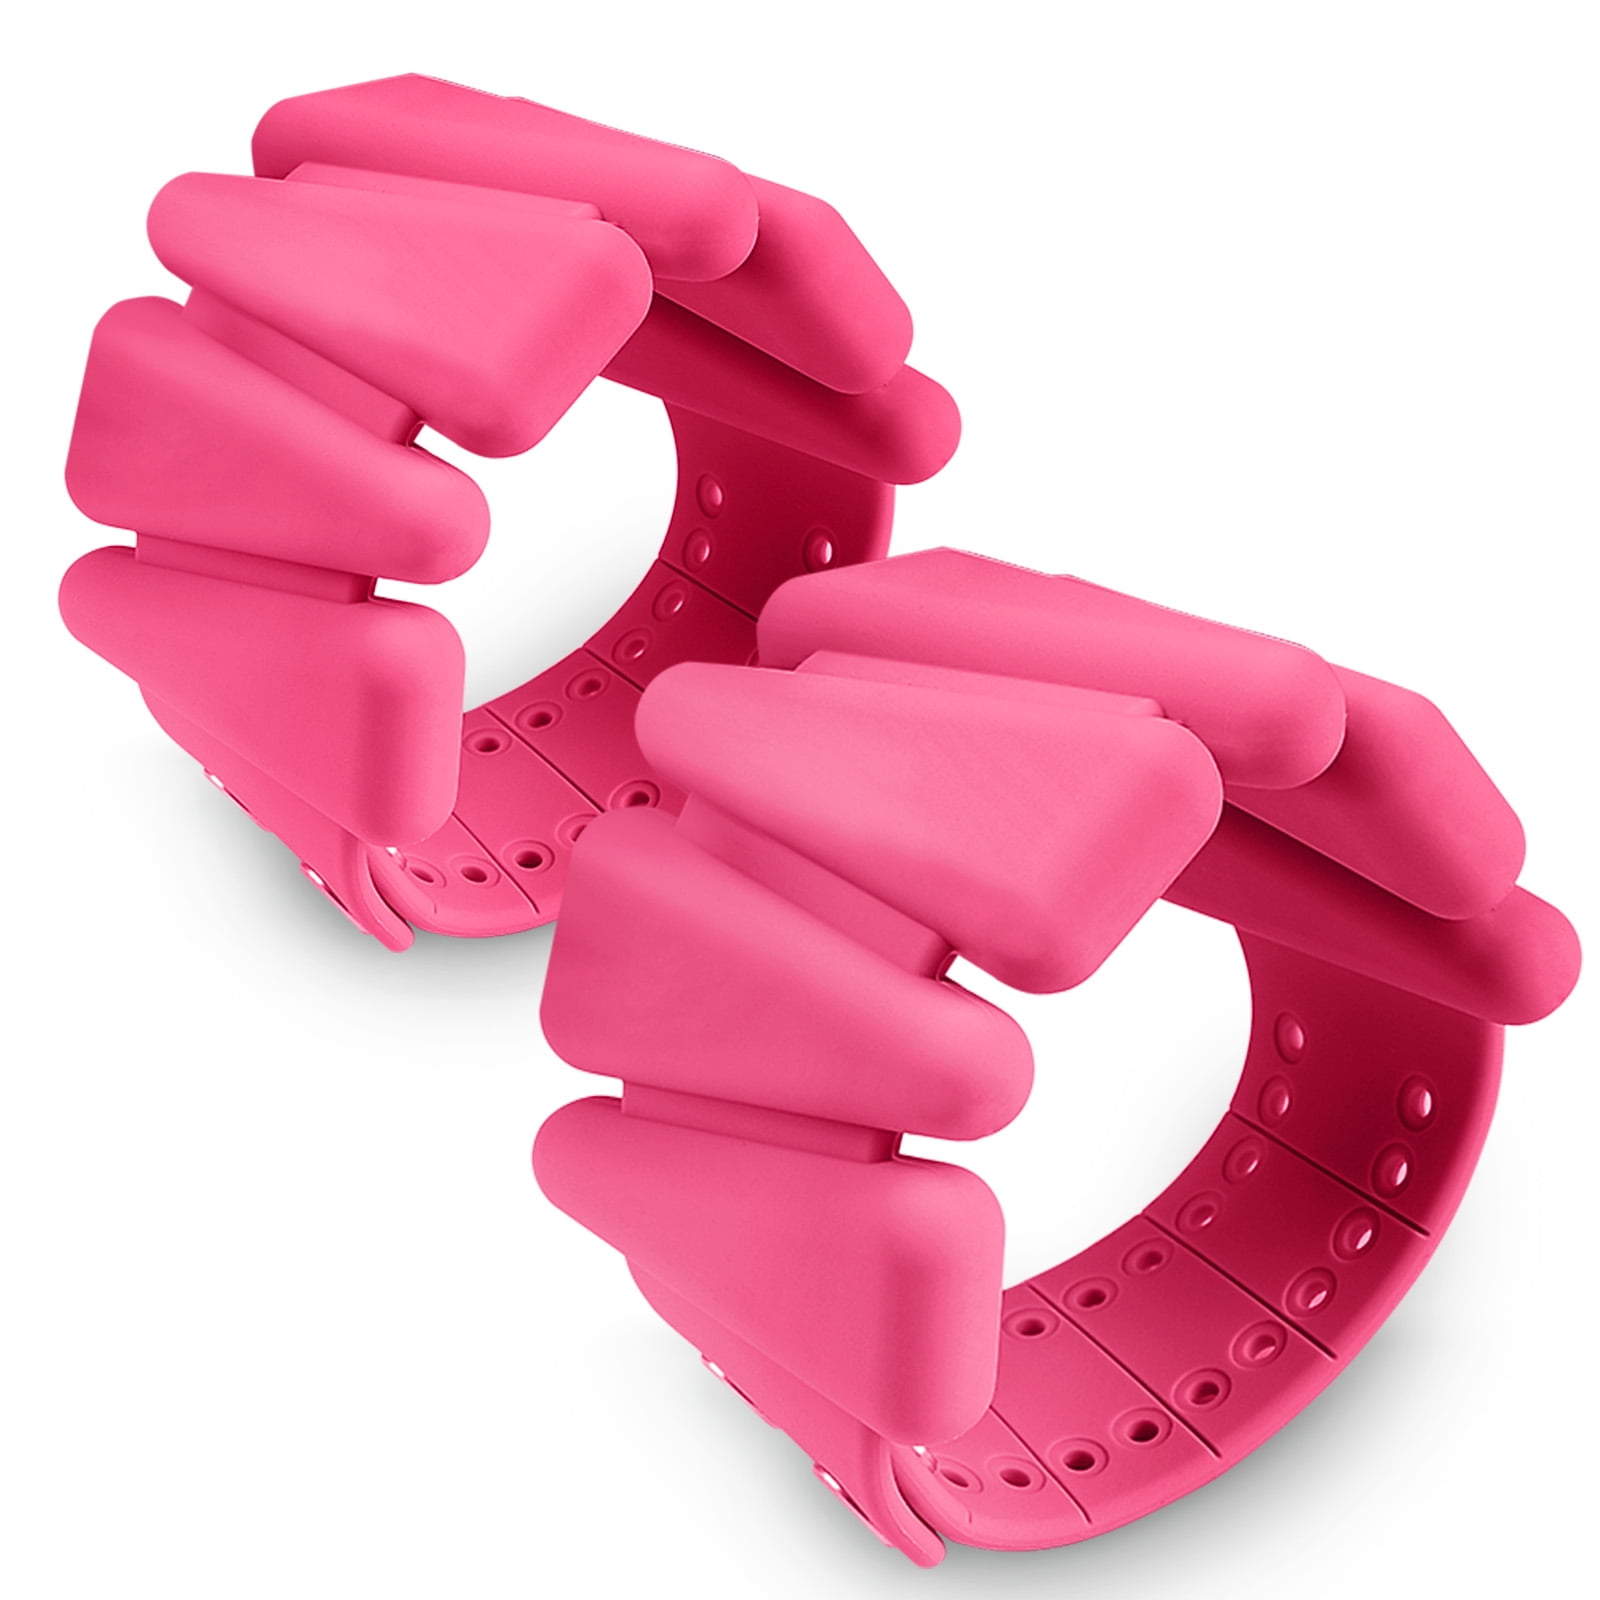 Parkinson's I - 'Classic' - Essential Tremor Bracelet - Weighted Very Heavy  Hand Shaking | Tremor | Spasms - Walmart.com